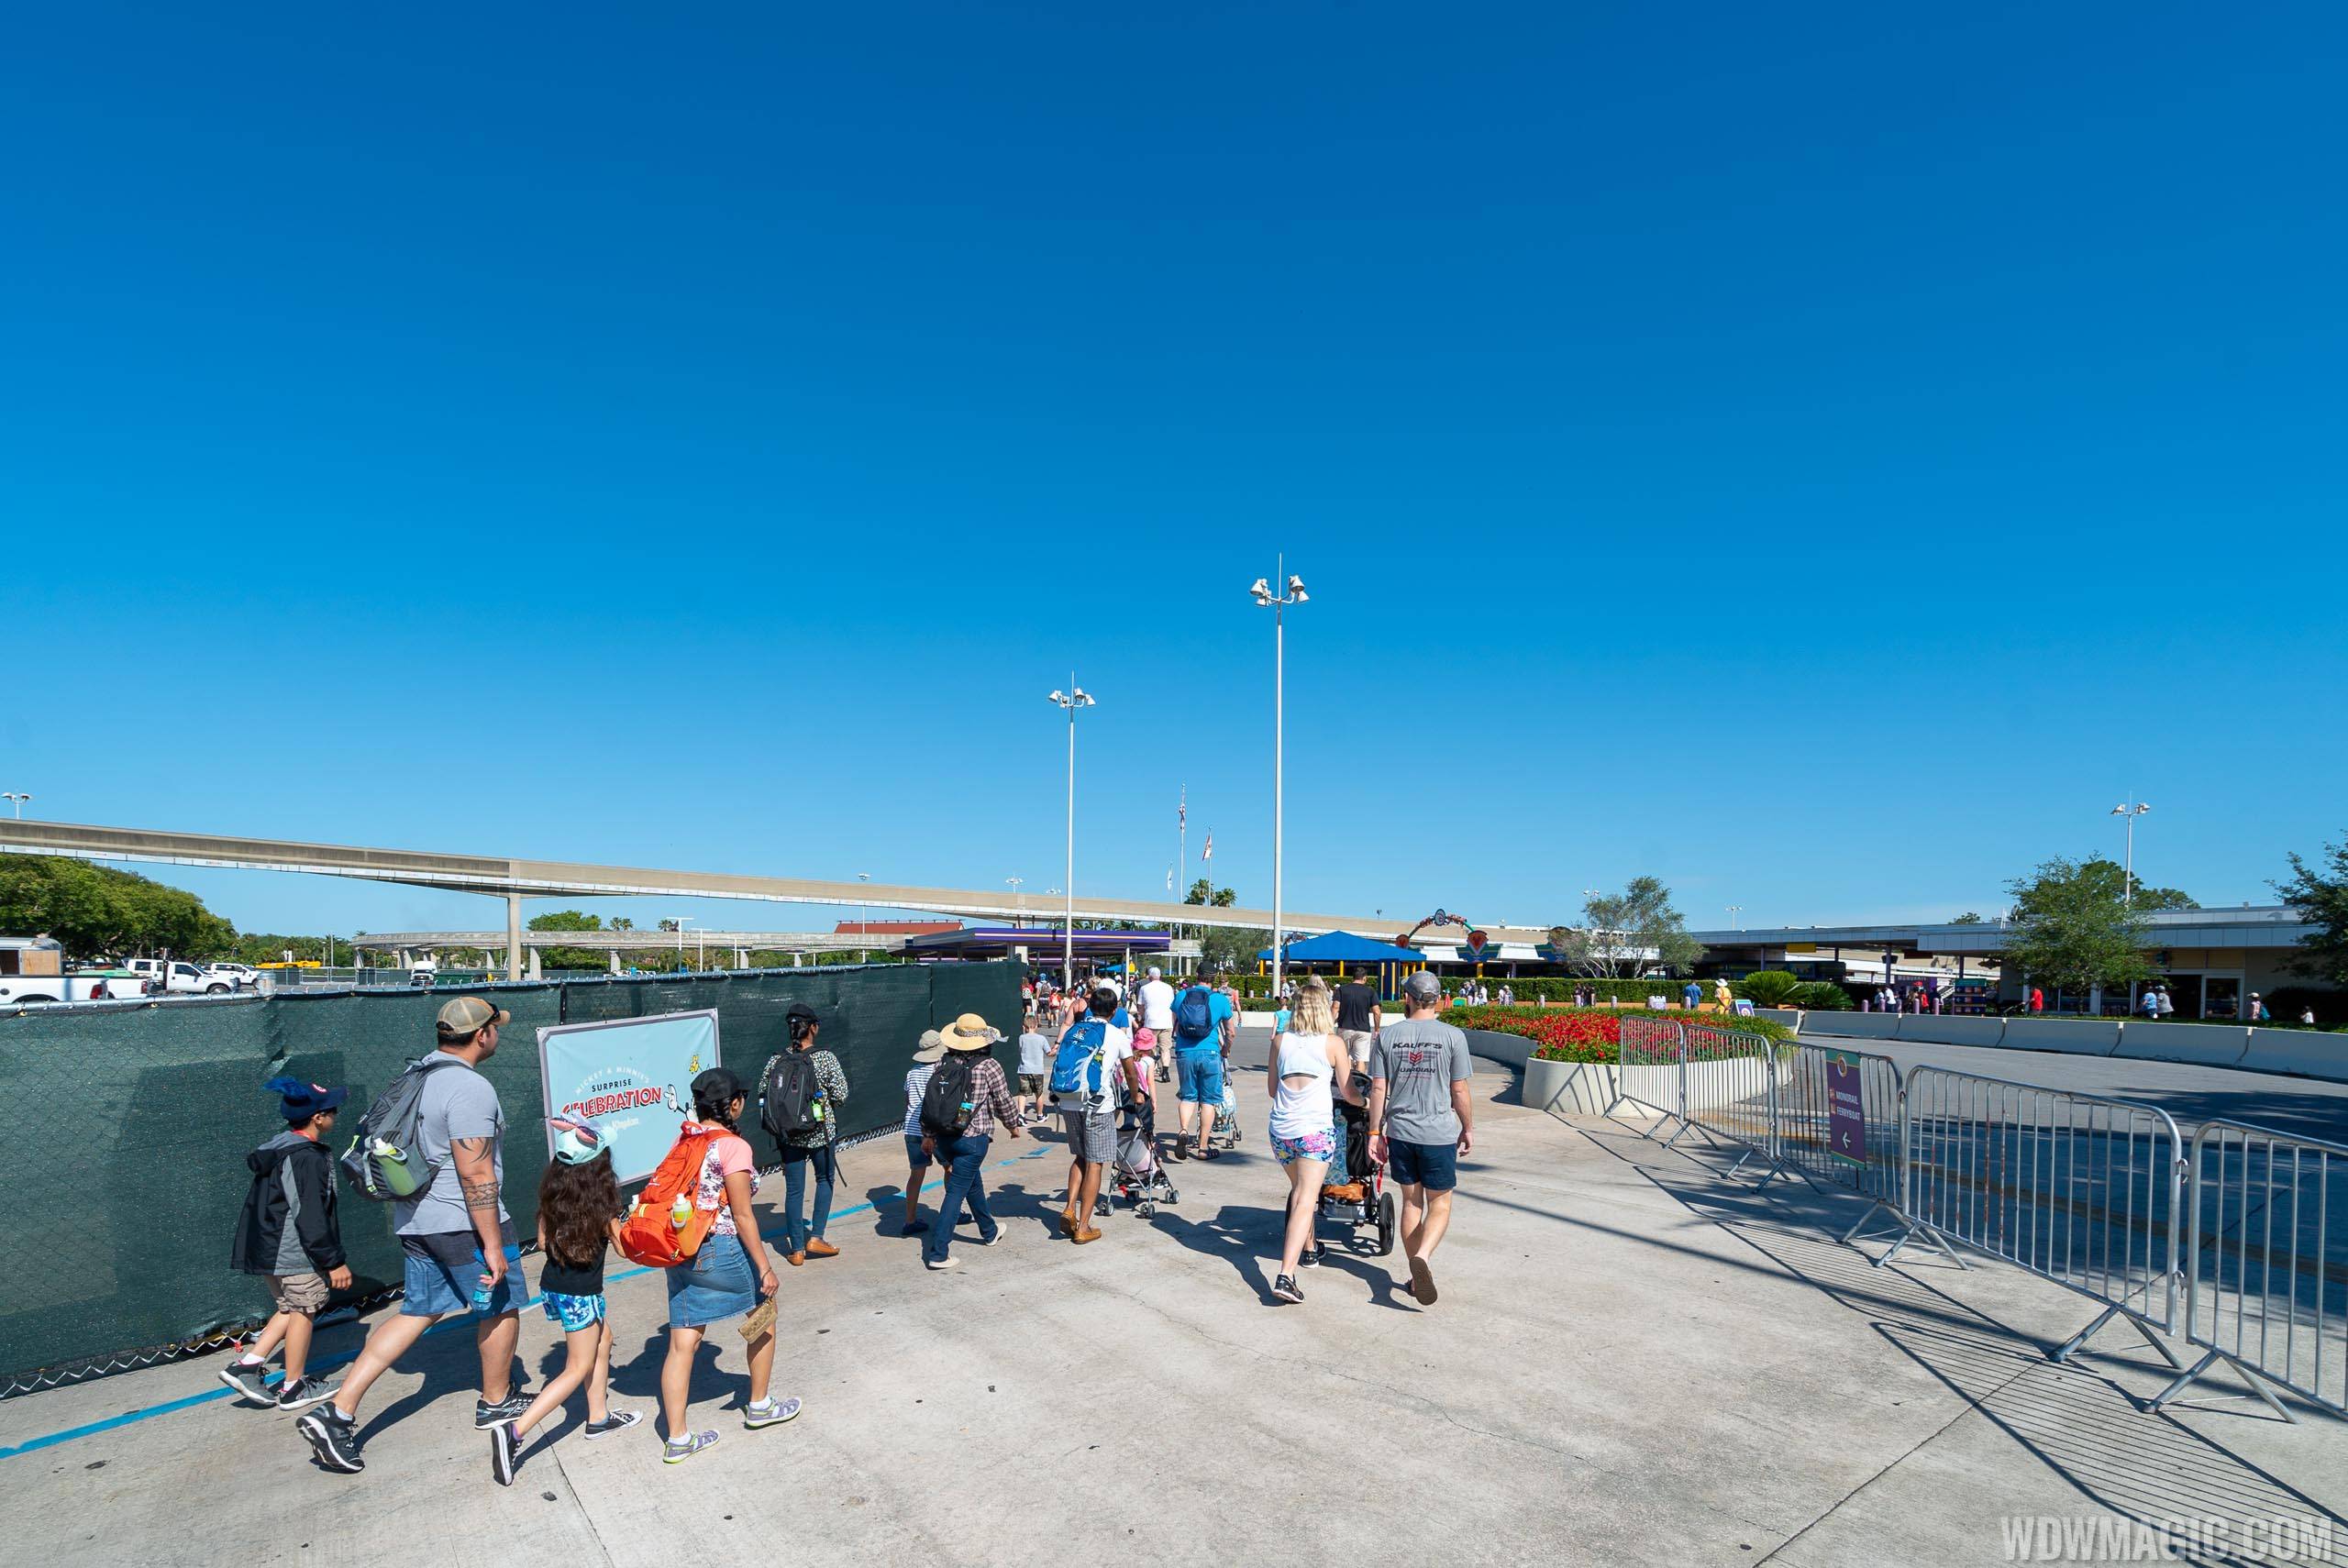 Temporary tram drop-off location at the Magic Kingdom Transportation and Ticket Center